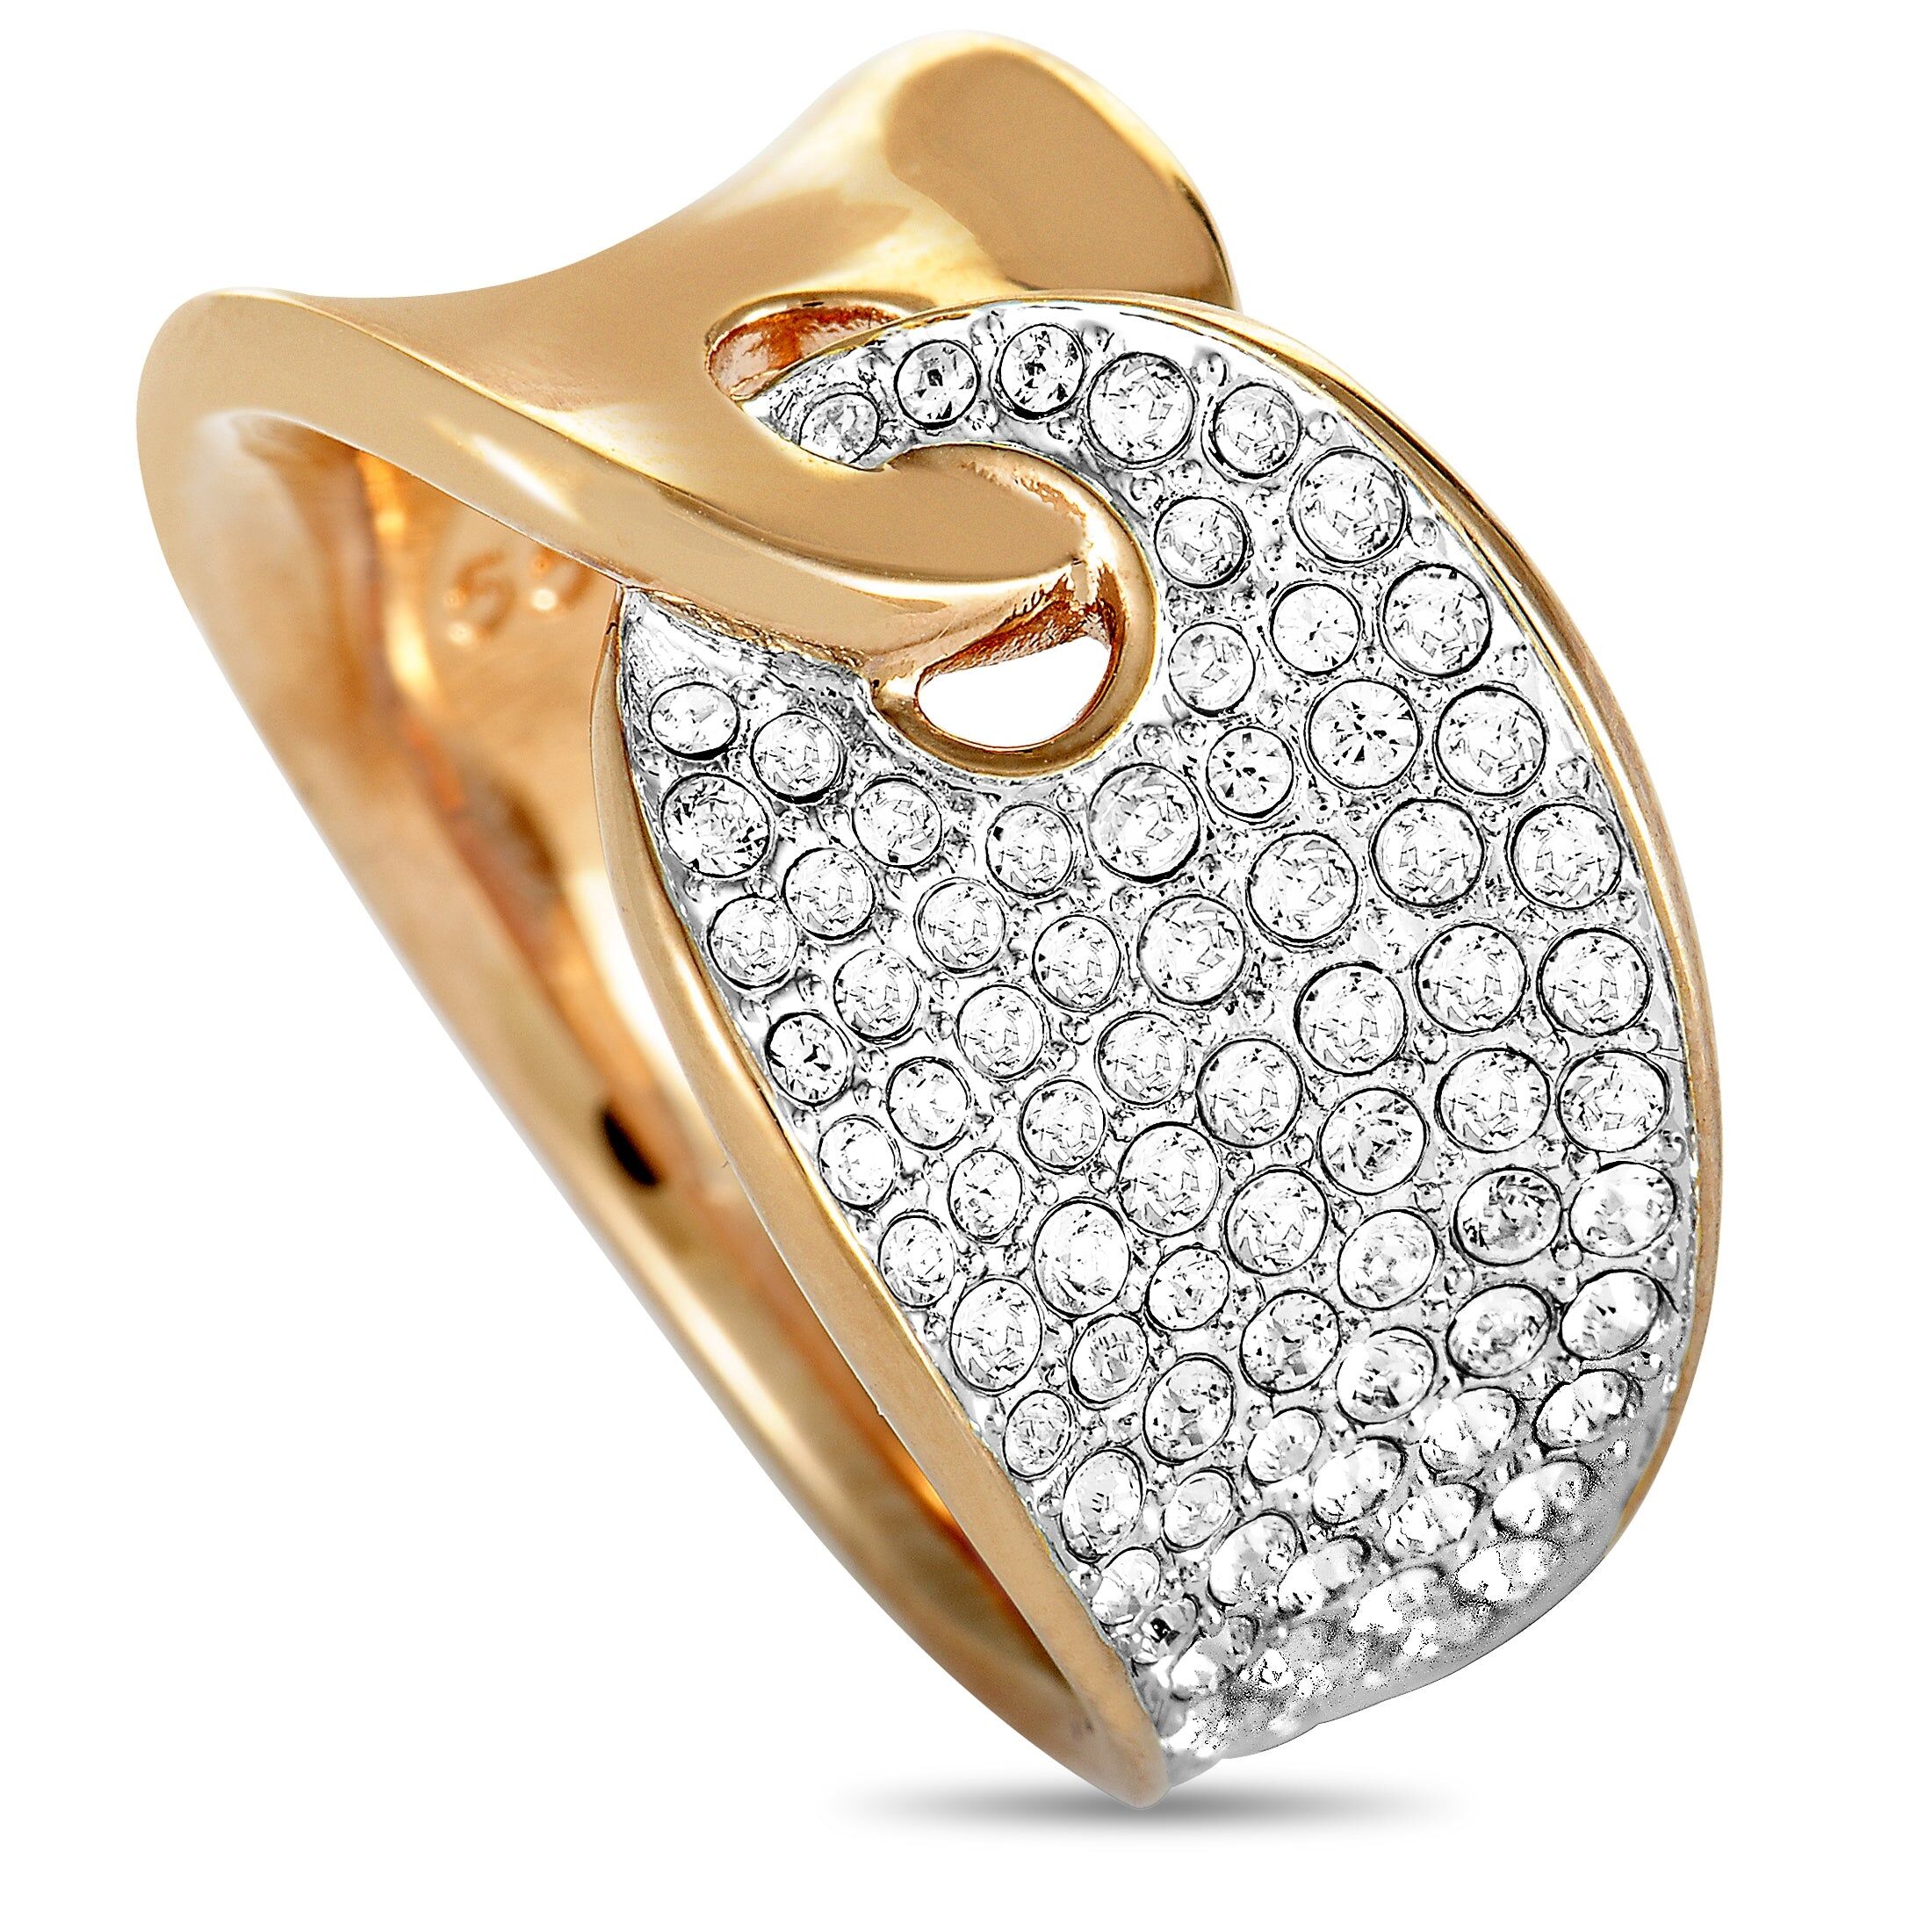 Swarovski Guardian Stainless Steel Rose Gold-Plated and Crystal Interlocking Band Ring US 6.75 female